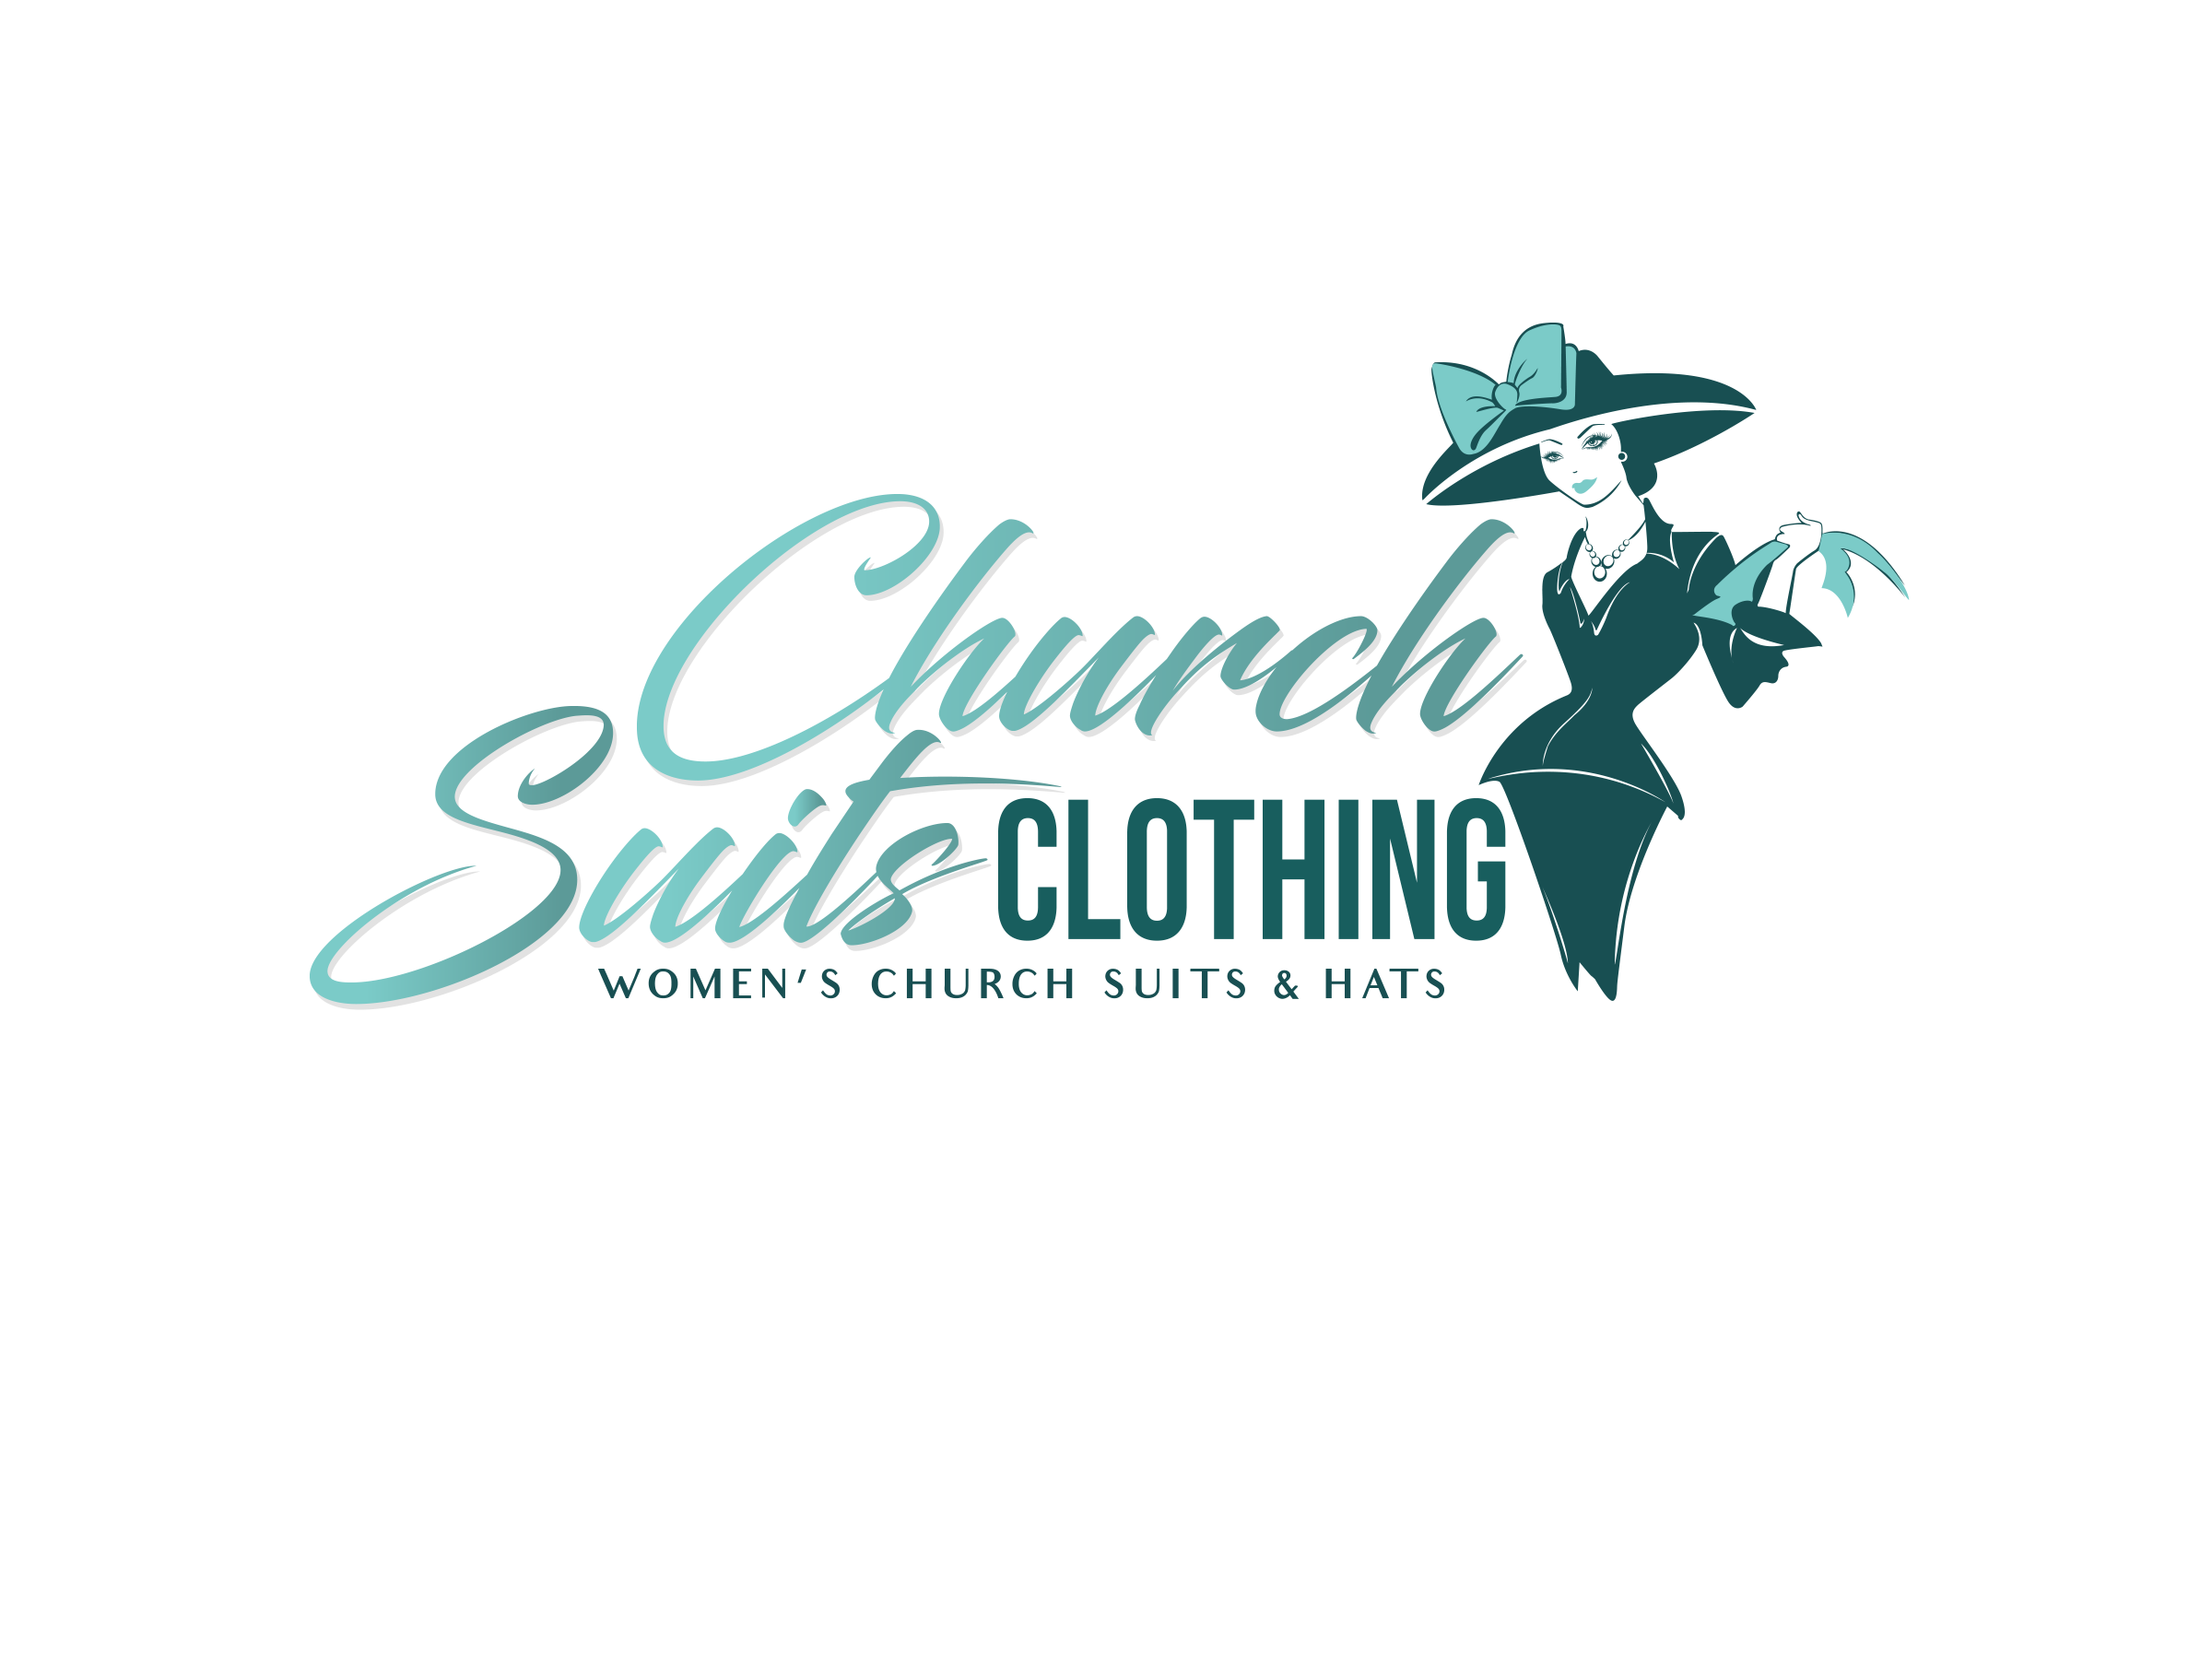 Church Suits Clothing